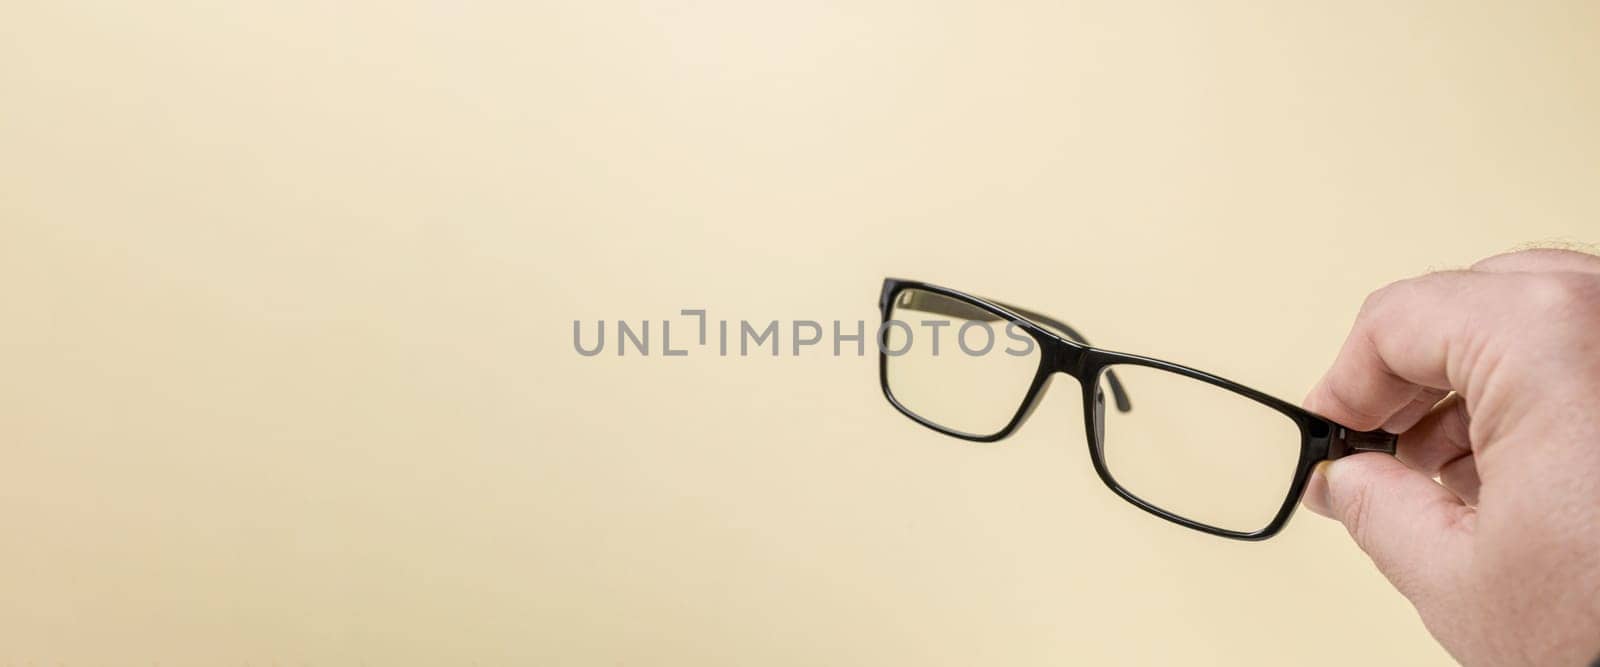 Hand holding black framed prescription glasses in front of yellow background by Sonat